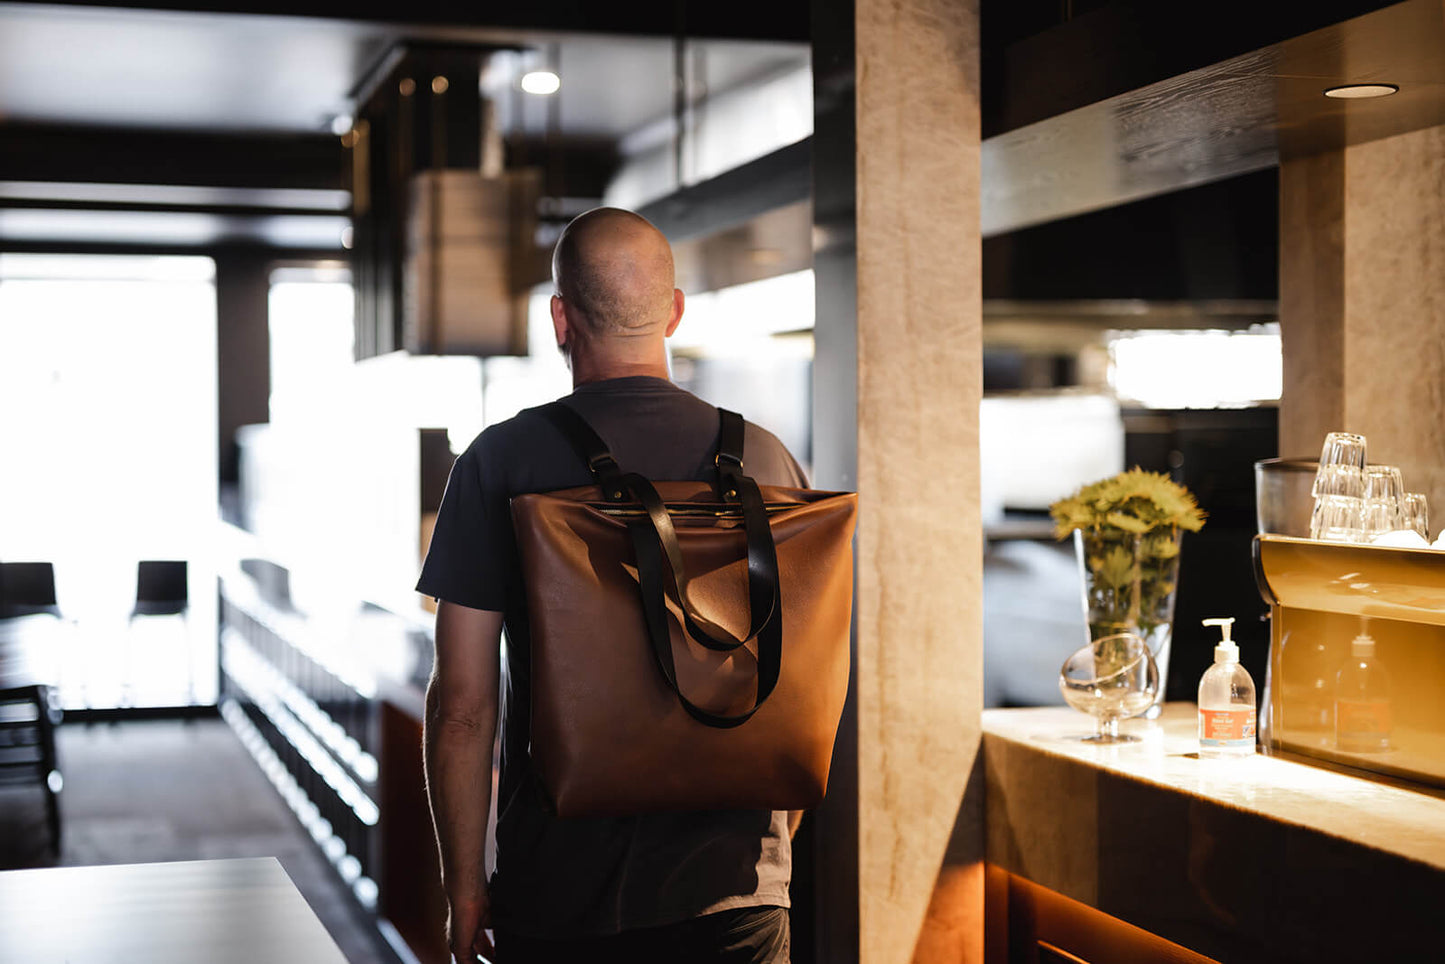 Bald man walking away from camera in a sleek restaurant and wearing a tan leather backpack with black straps. The backpack is the Tan Leather Backpack & Tote by Ella Jackson